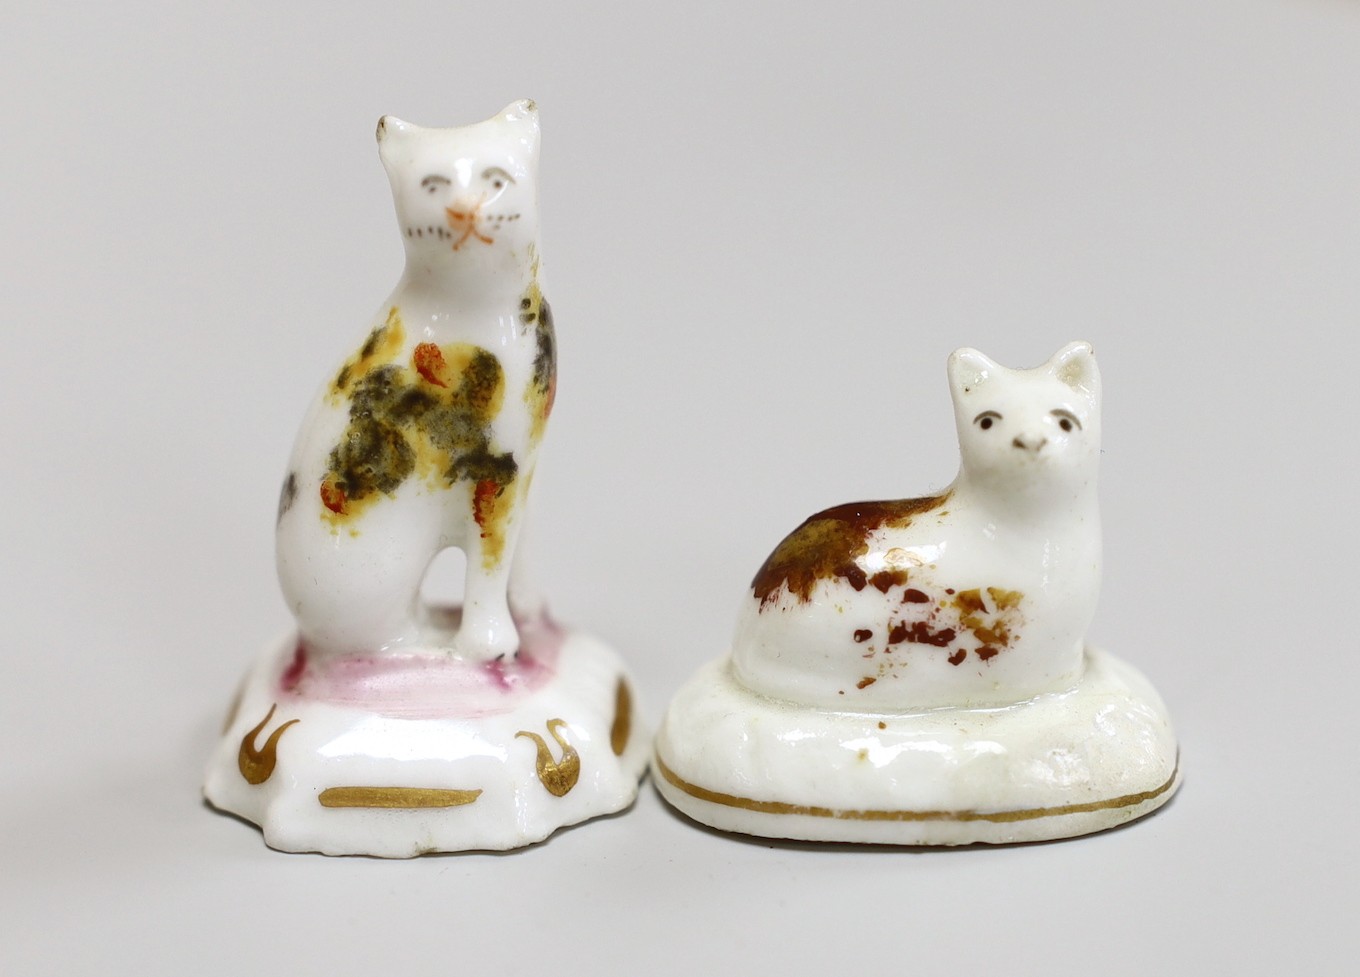 A seated toy Staffordshire cat with tortoiseshell markings, together with a Staffordshire recumbent toy cat with brown markings, c.1830-50, tallest 4cm., Cf. Dennis G.Rice Cats in English porcelain, colour plate 57., Pro